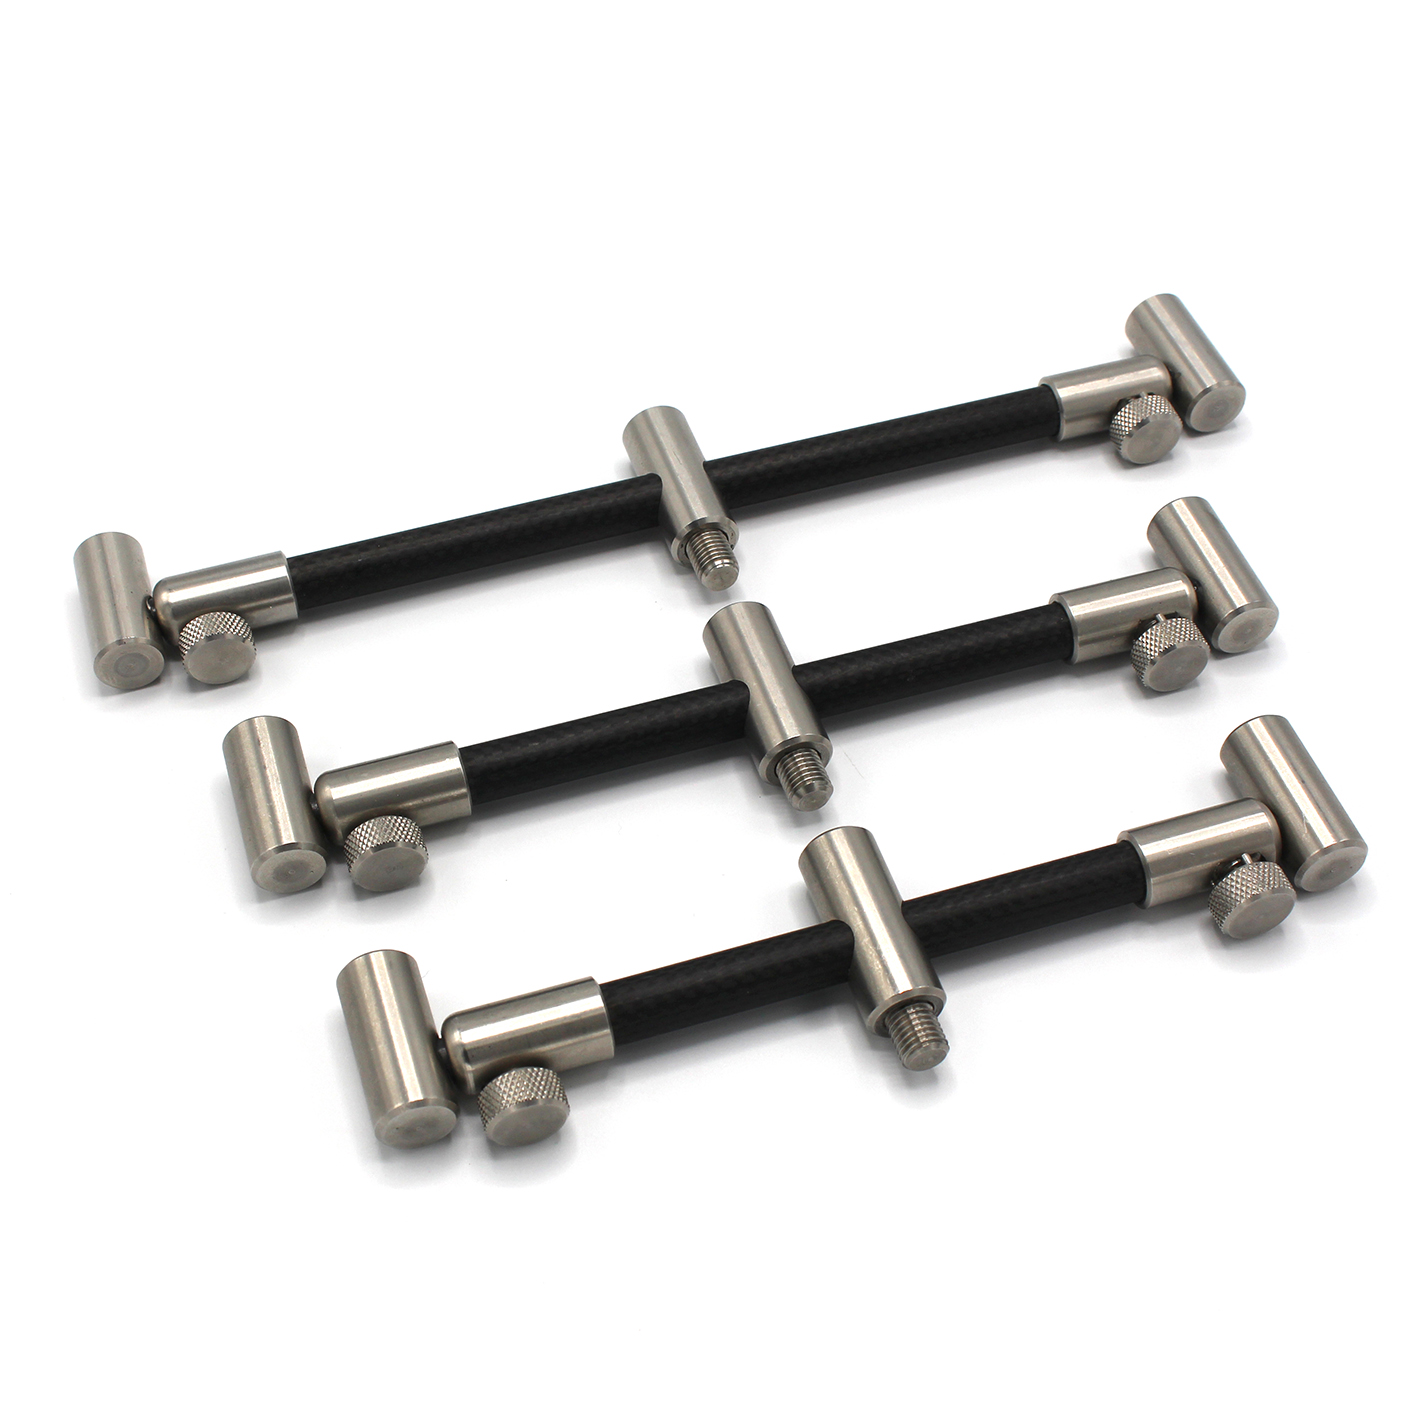 Stainless Carbon 3 Rod Adjustable Buzz Bars